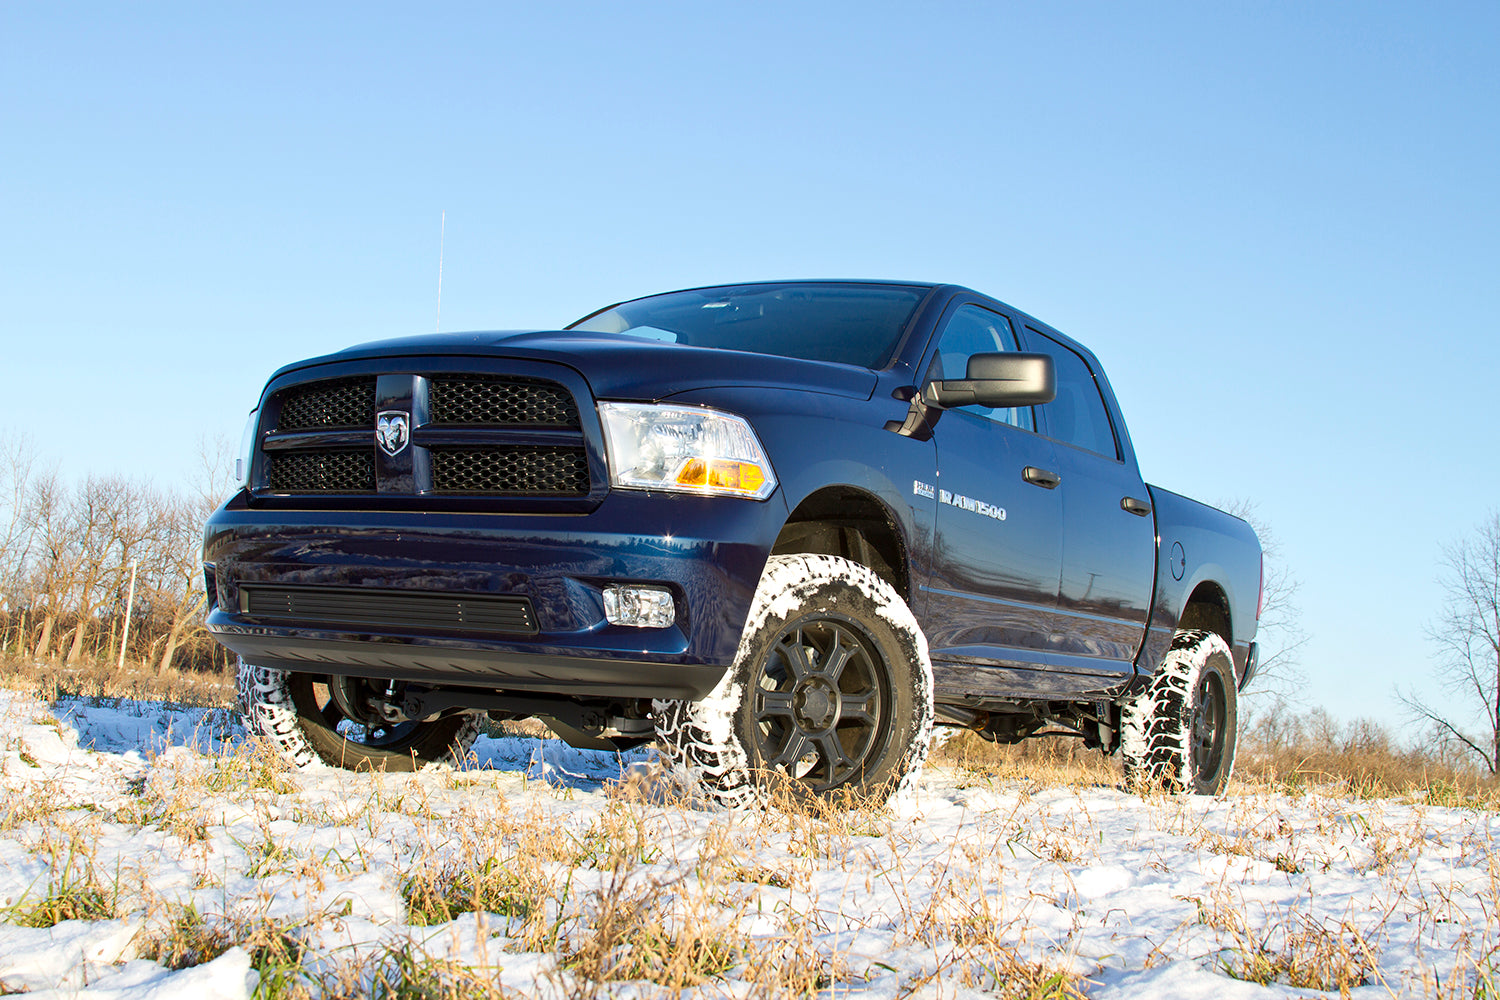 BDS 6" Lift Kit for Ram 1500 DS - Outback Kitters